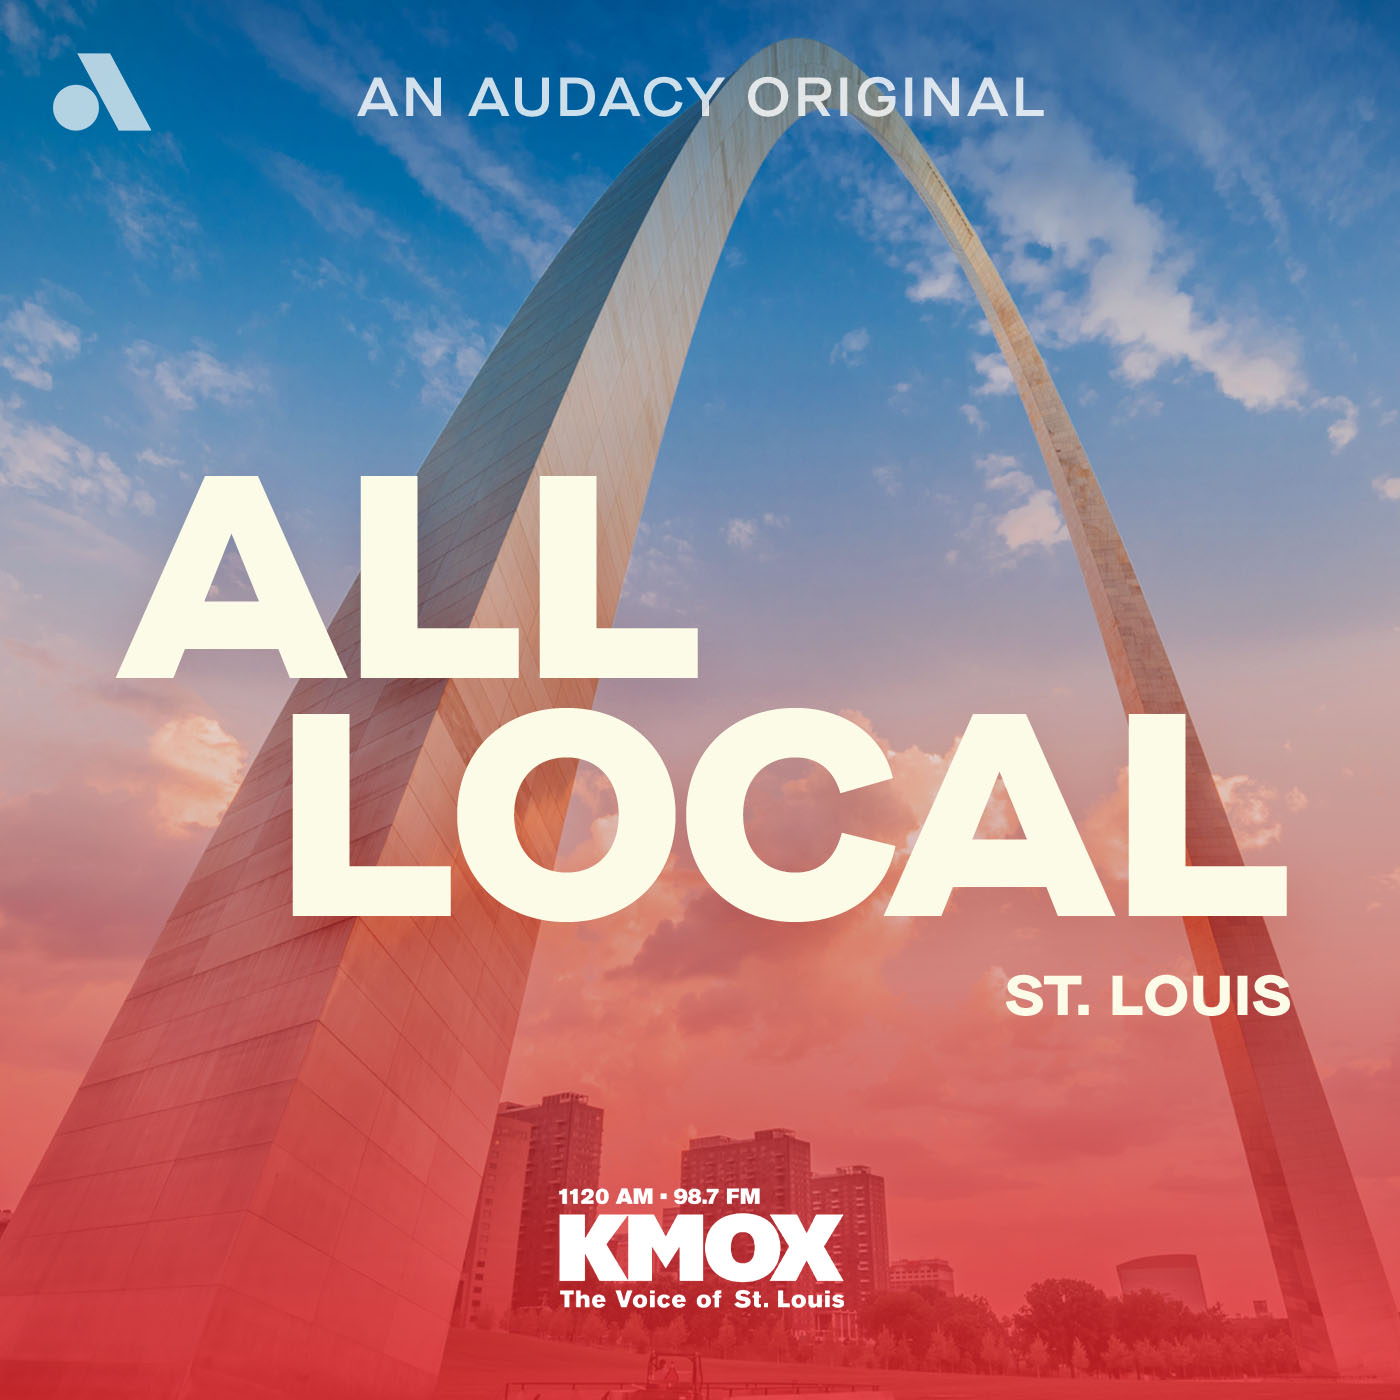 St. Louis All Local AM Podcast: Overturning Christopher Dunn's 1991 murder conviction, trash sick out